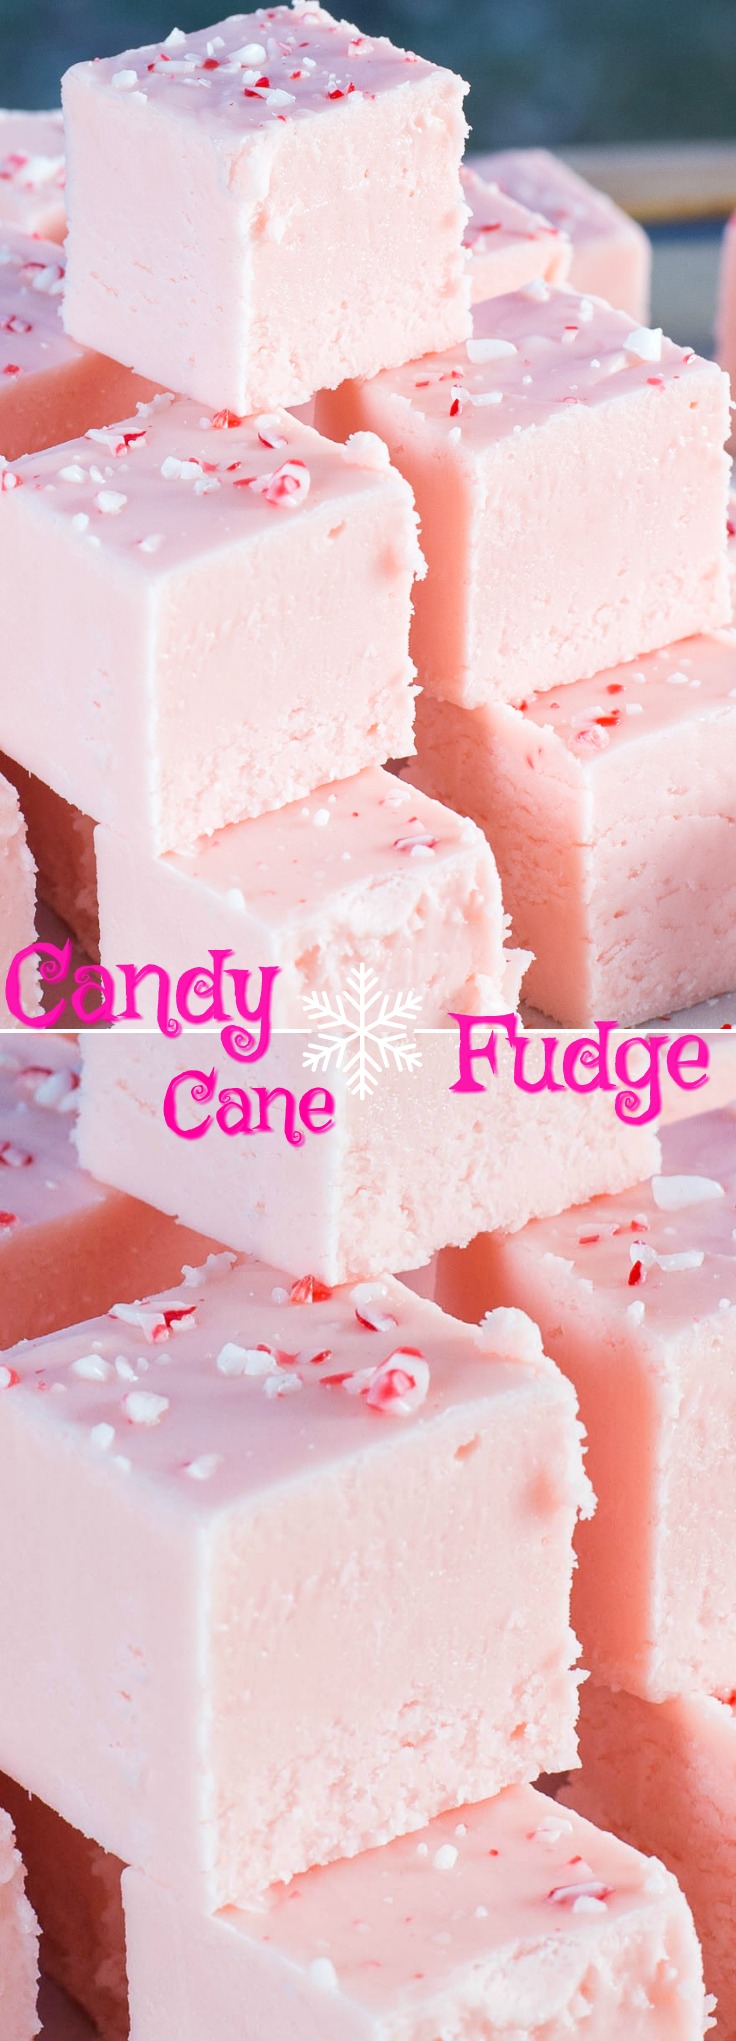 Candy Cane Fudge is incredibly creamy and smooth. This sweet treat is  must make for the Holidays! Some of the sugar is replaced with finely ground candy canes for perfect candy cane flavor.  via @artandthekitch